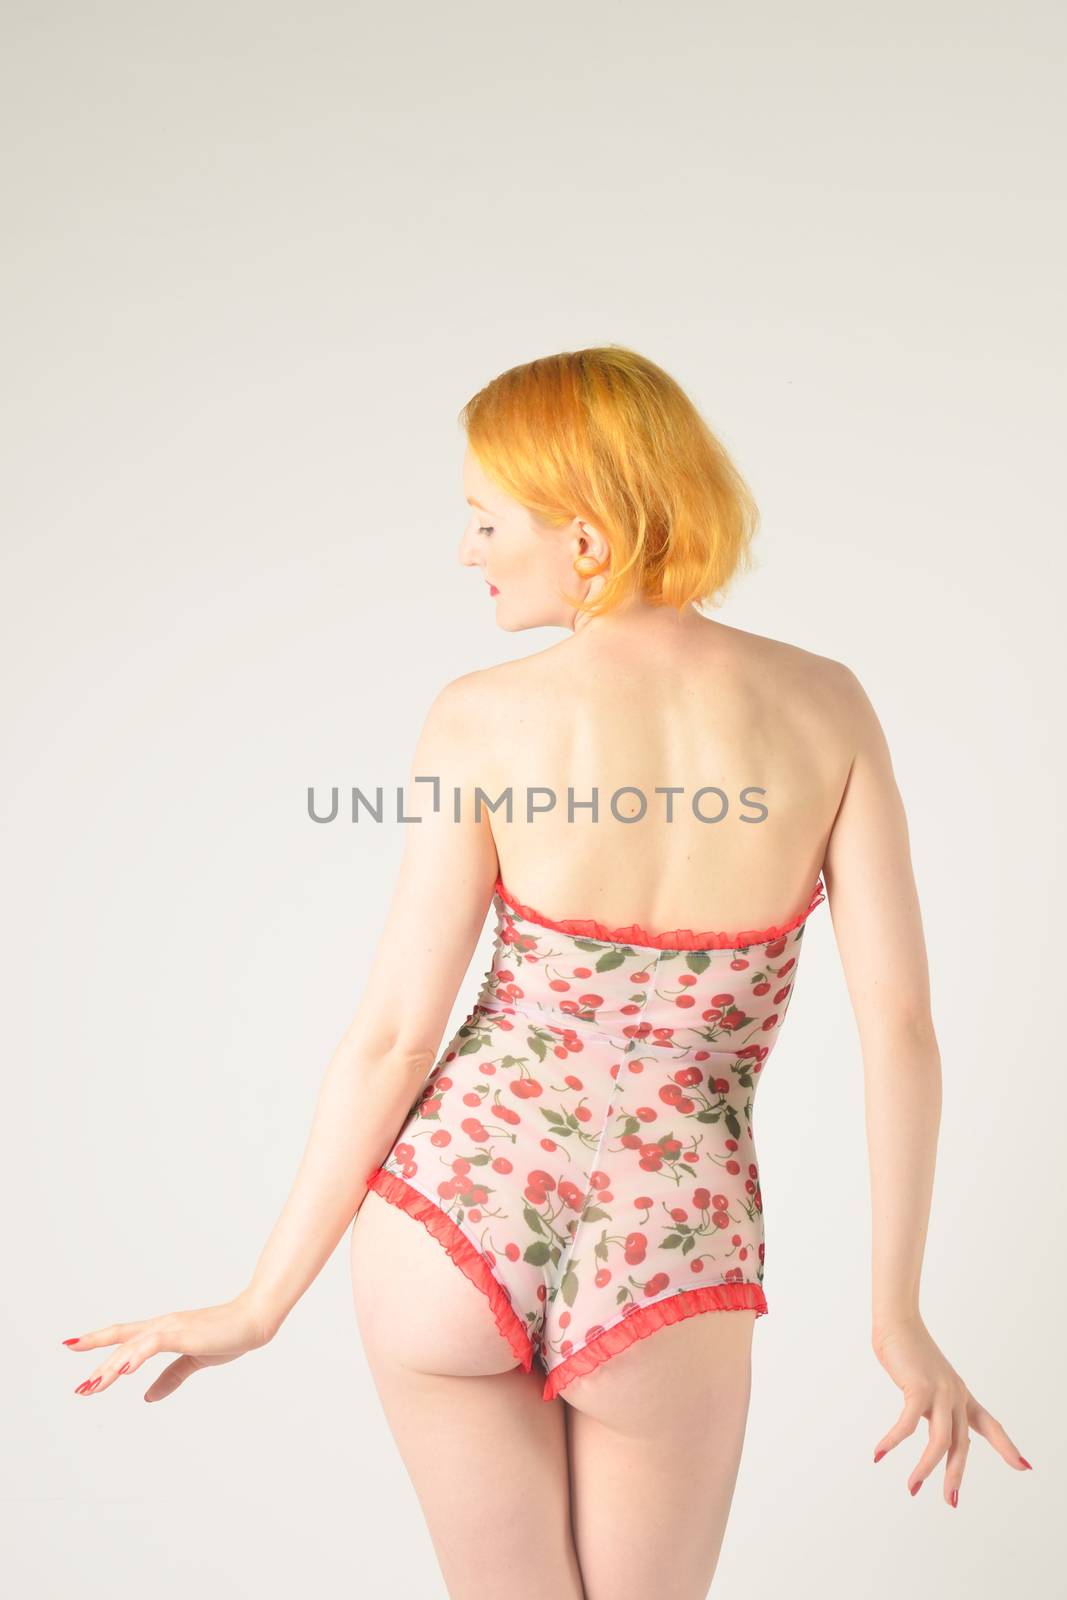 Red head from behind by pauws99